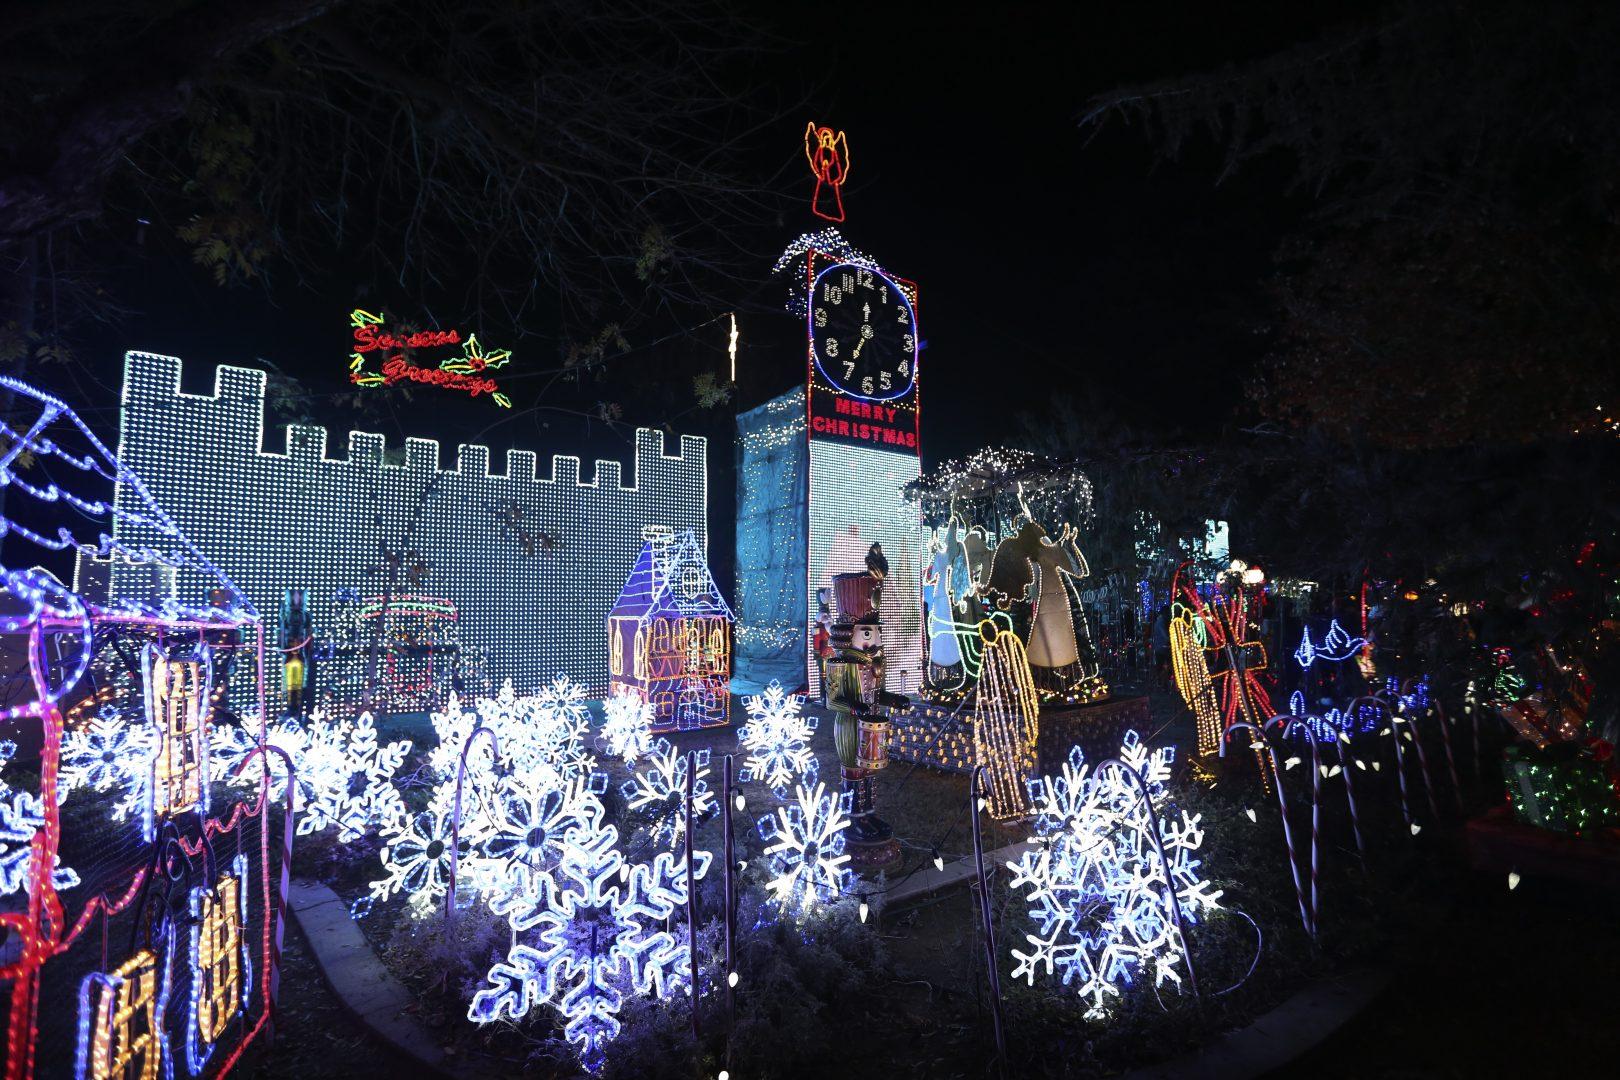 Christmas Tree Lane will have its final walking night Dec. 11 from 6 to 10 p.m. (Larry Valenzuela/The Collegian)